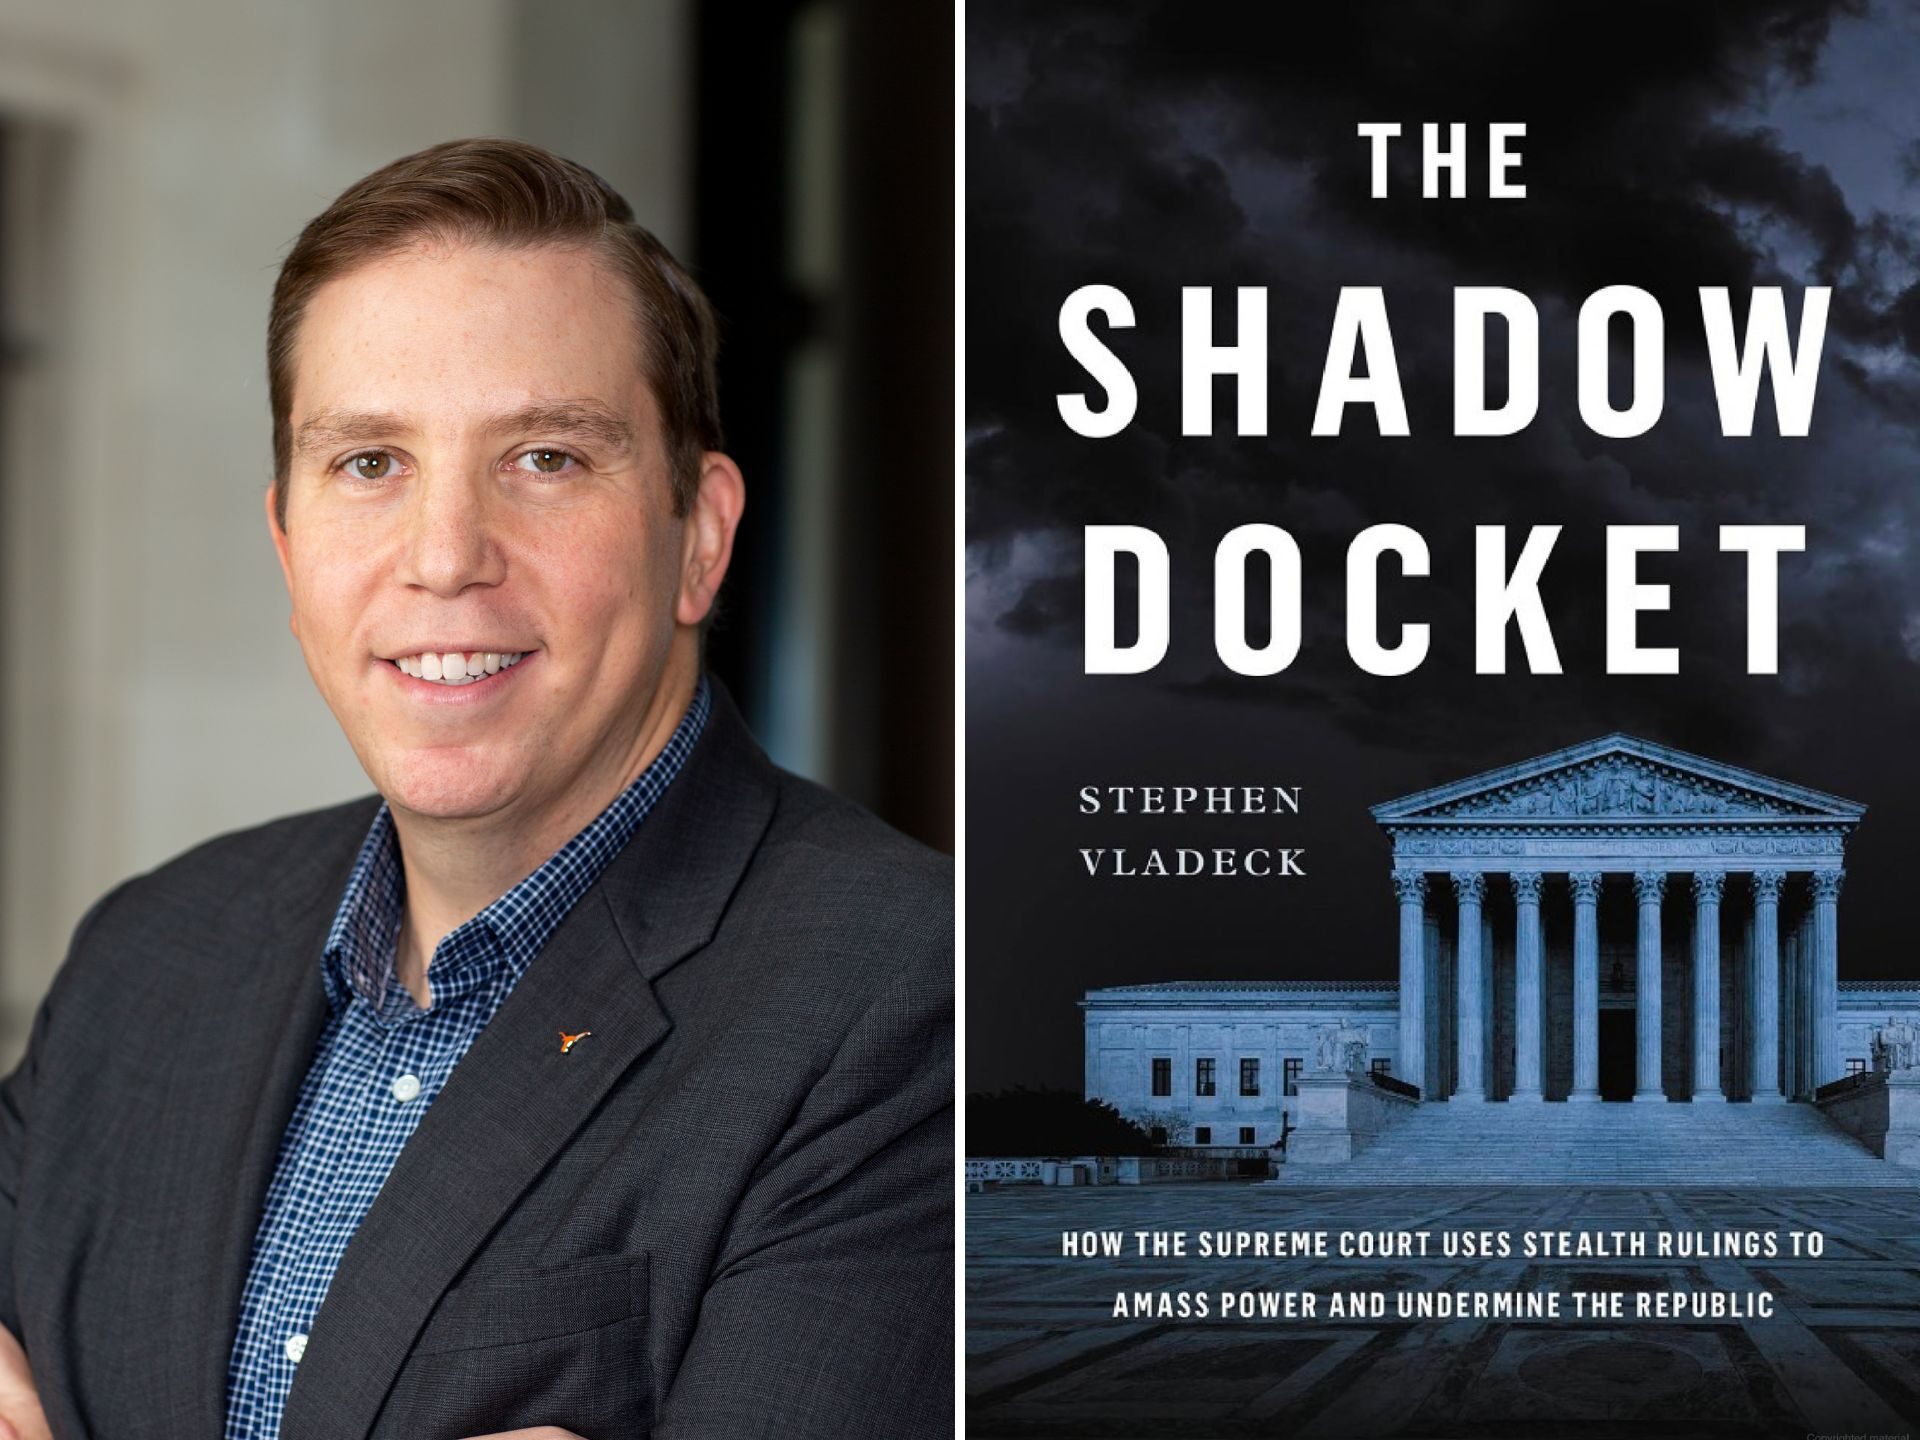 Portrait of Steve Vladeck and book cover of The Shadow Docket